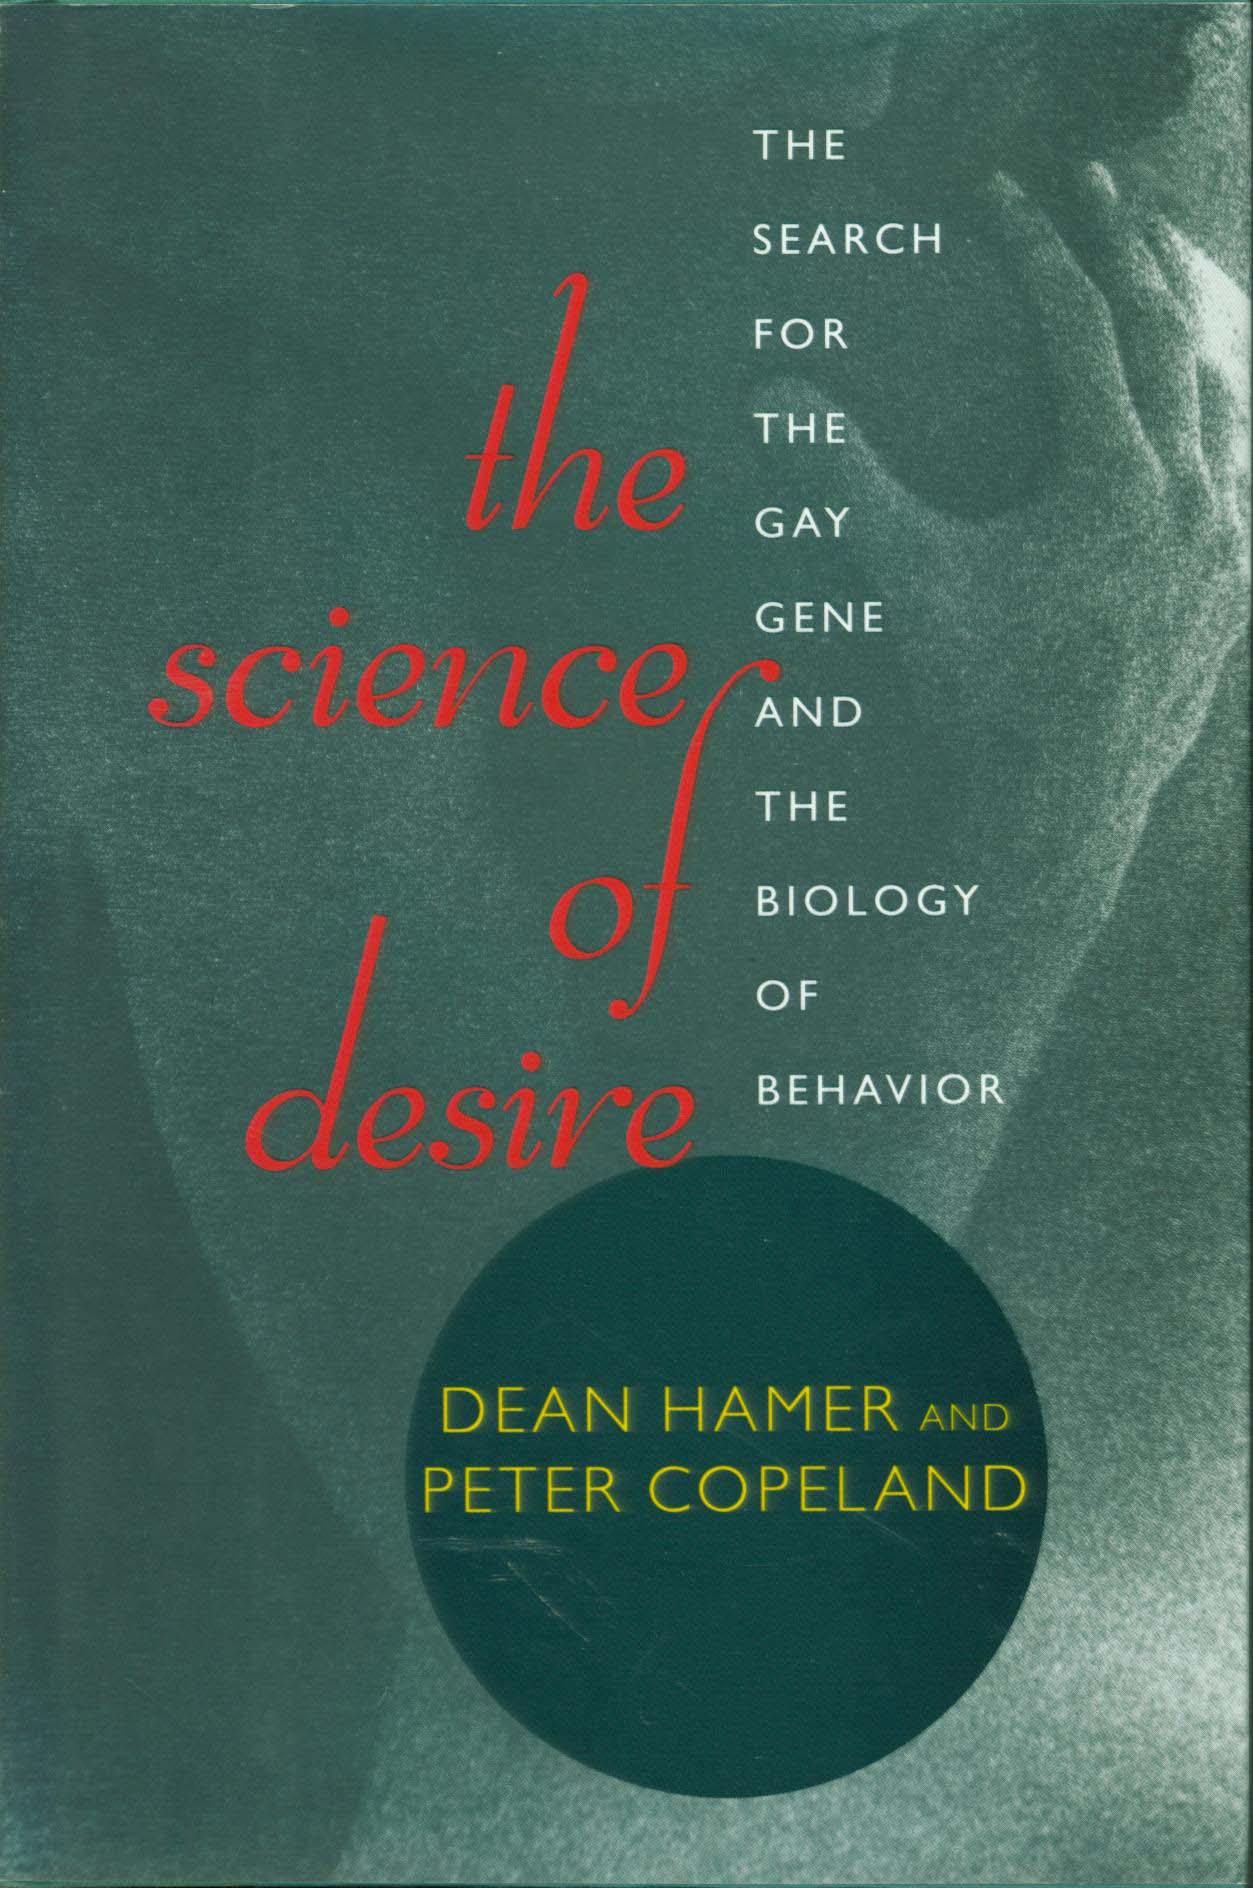 THE SCIENCE OF DESIRE: the search for the gay gene and the biology of behavior--cloth.